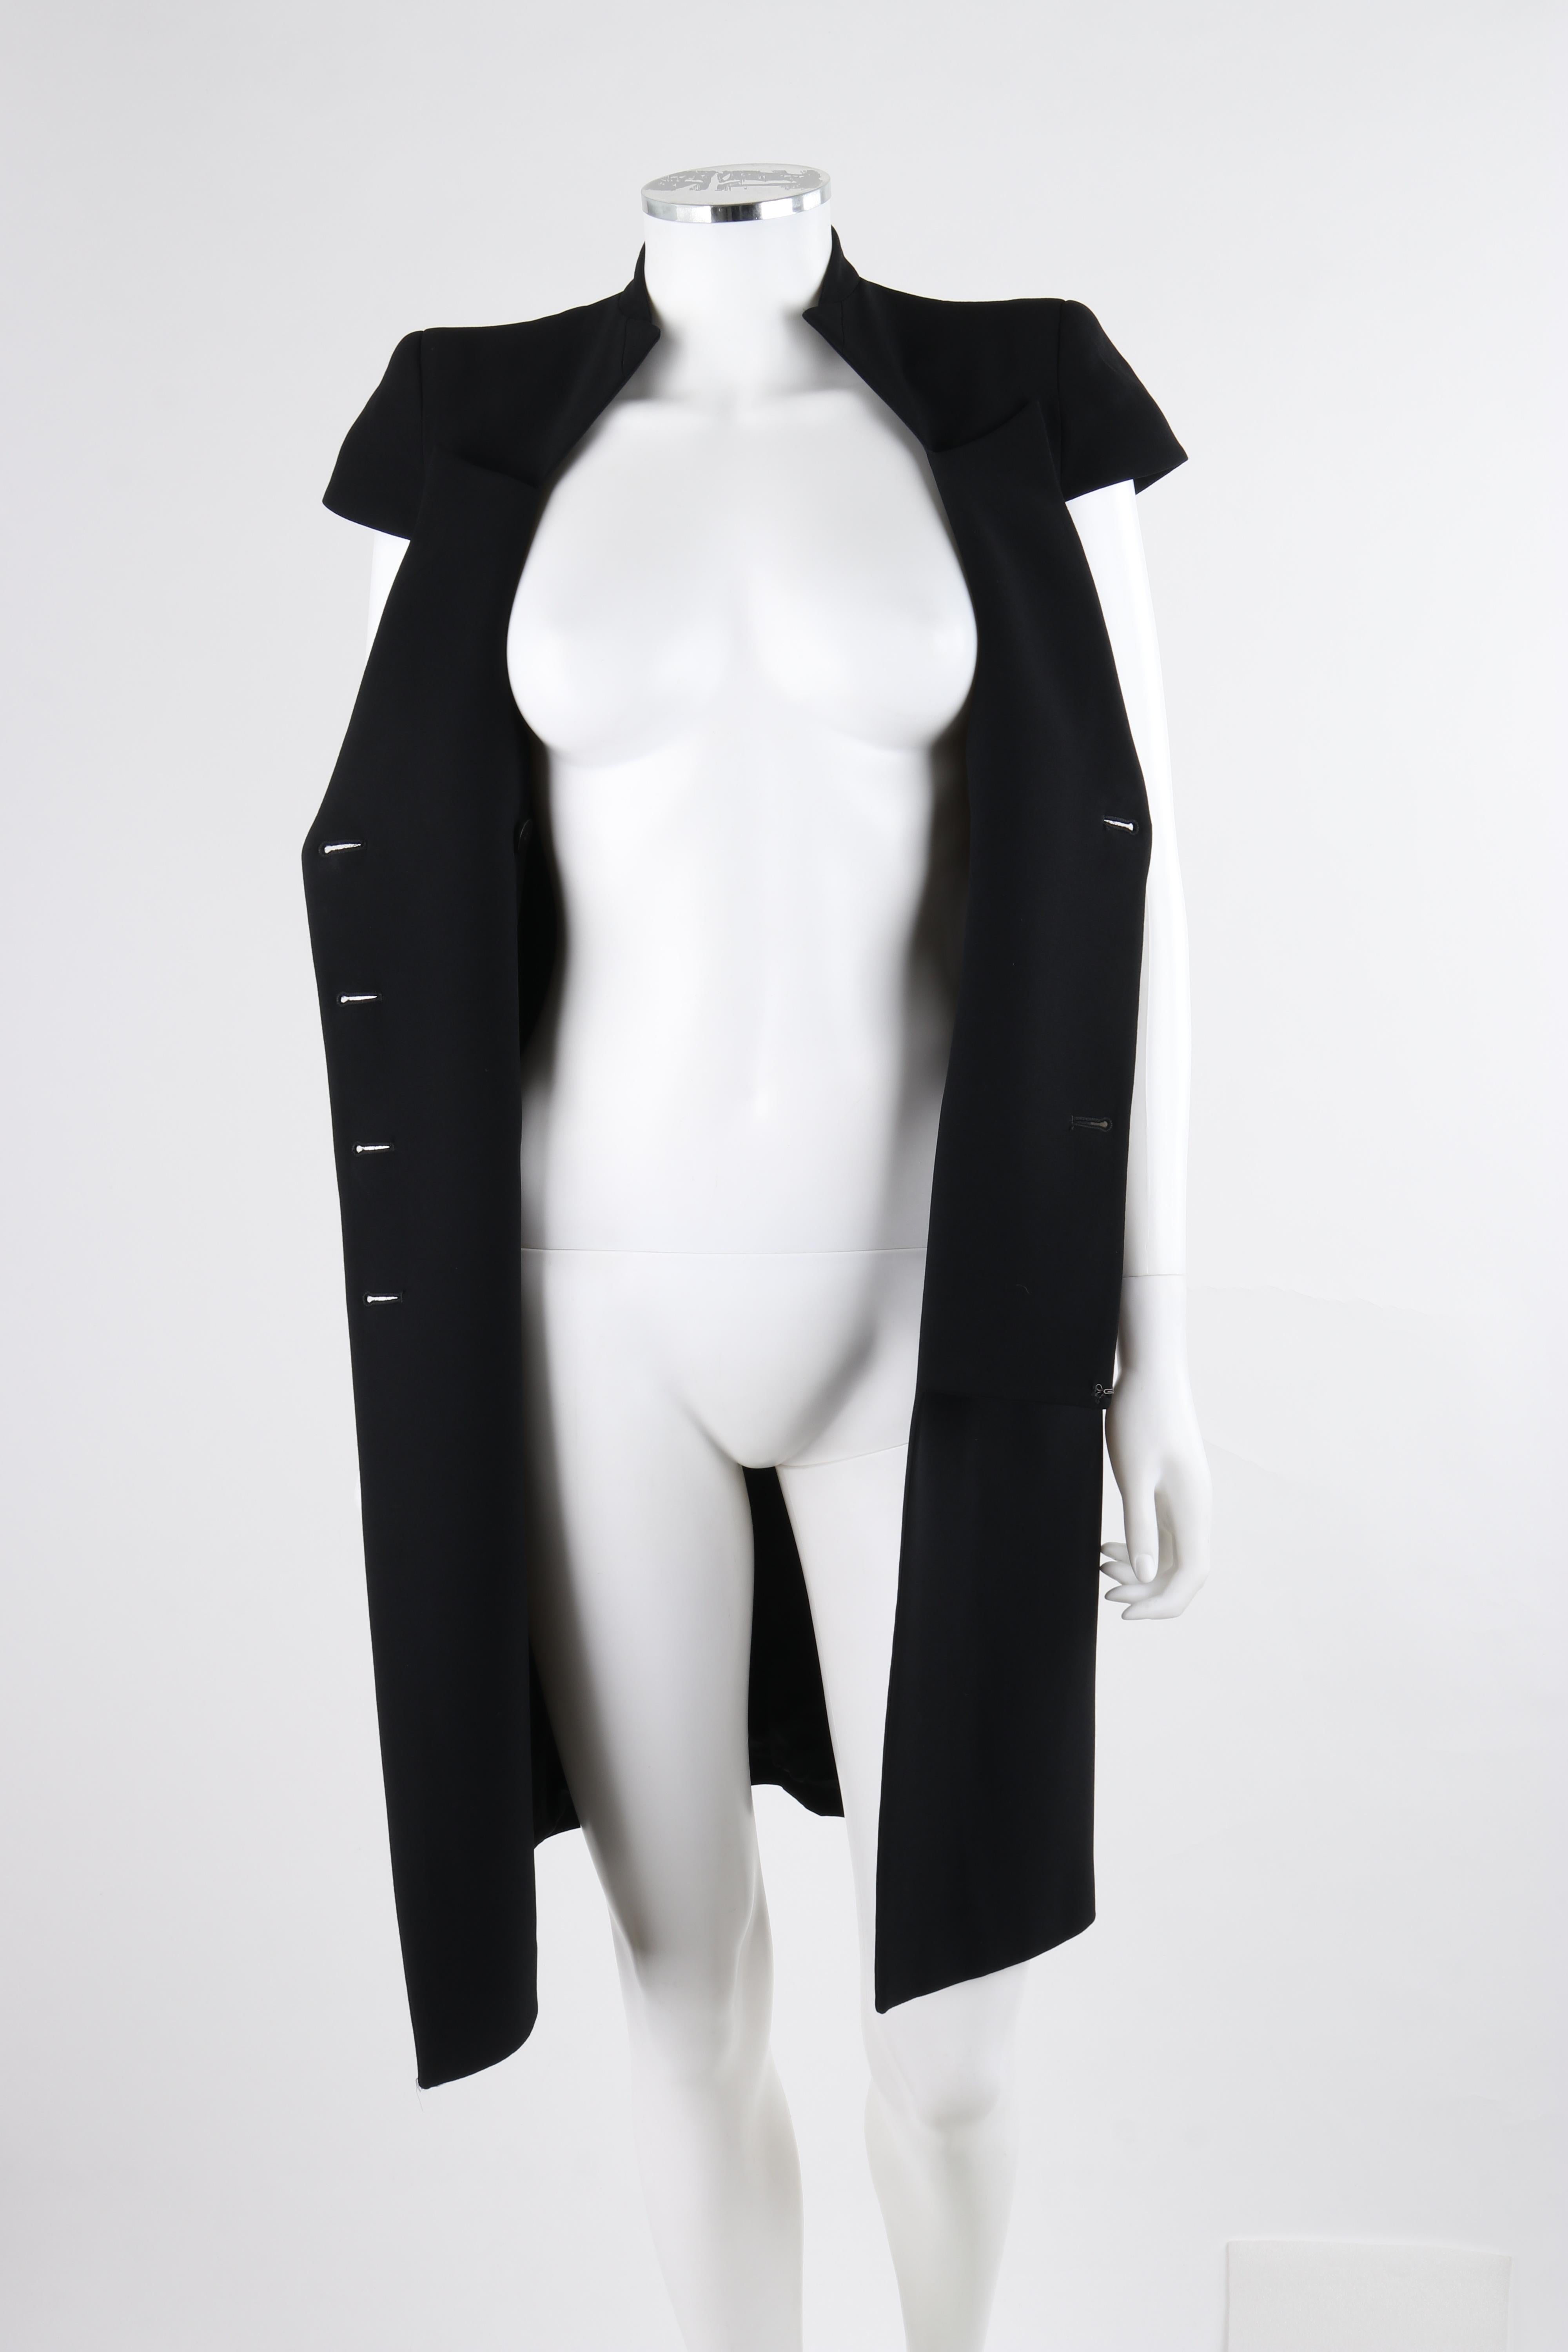 ALEXANDER McQUEEN c.2012 Black Double Breasted Button Up Collar Cocktail Dress For Sale 5